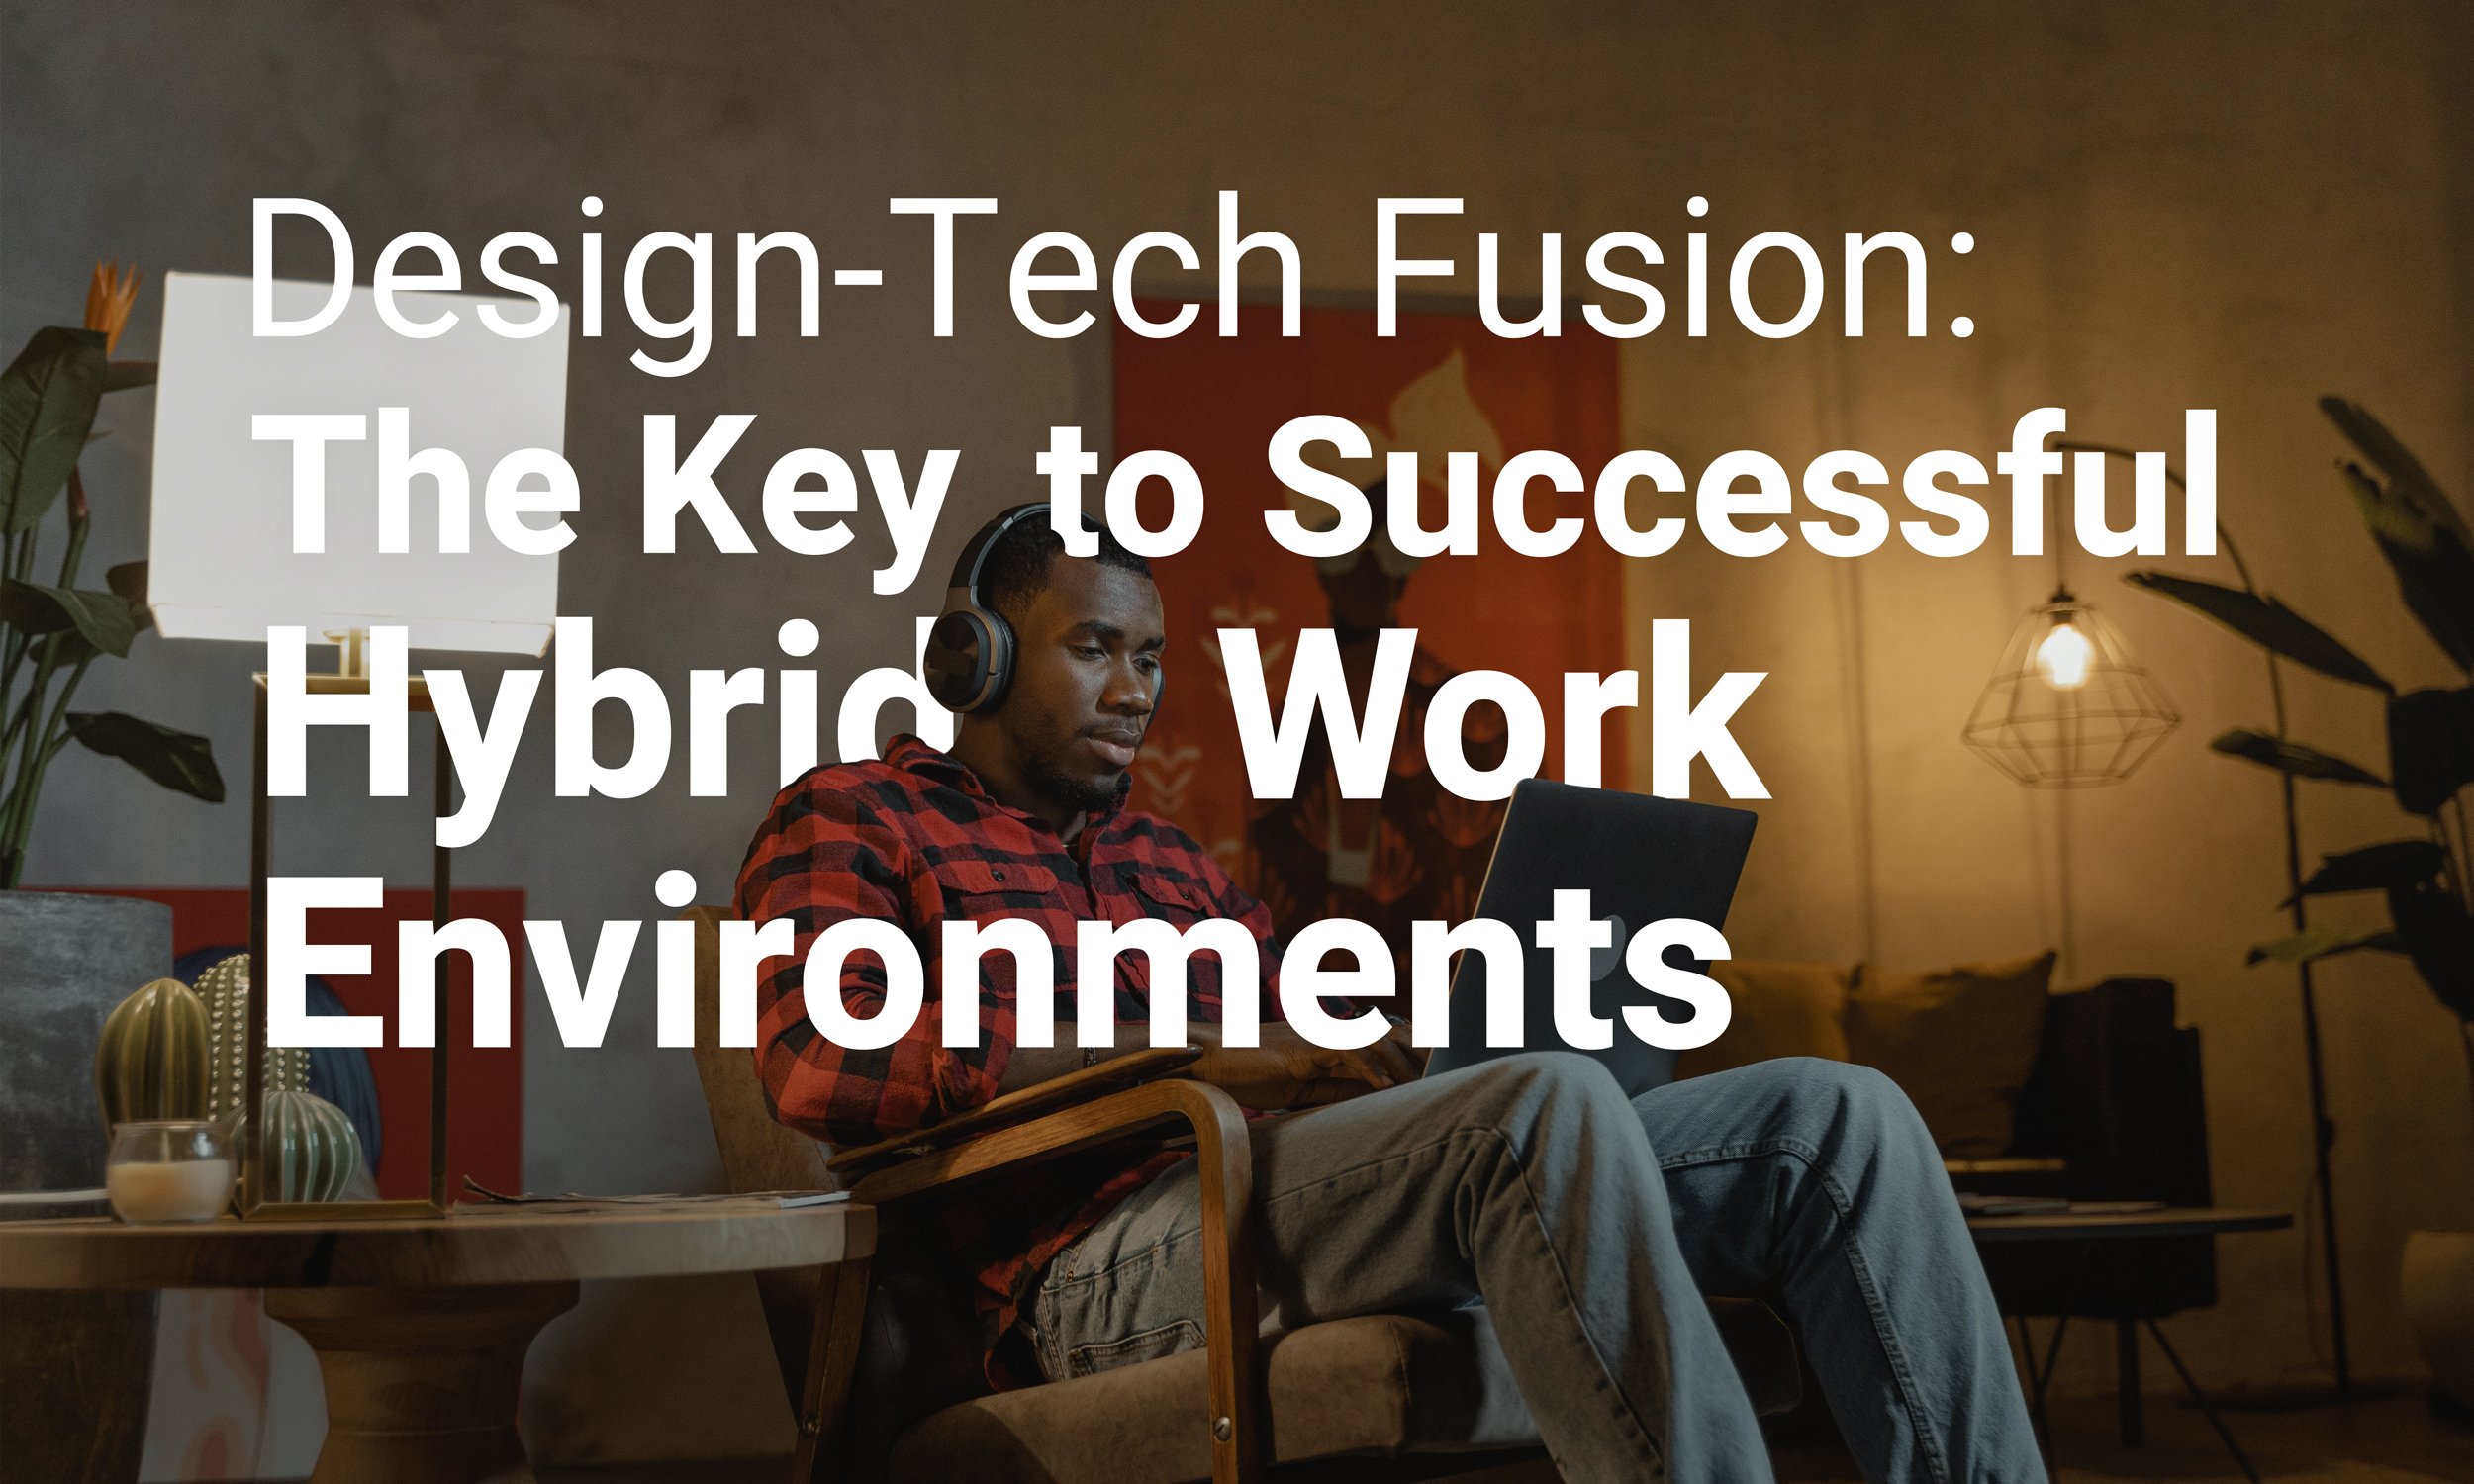 Design-Tech Fusion: The Key to Successful Hybrid Work Environments